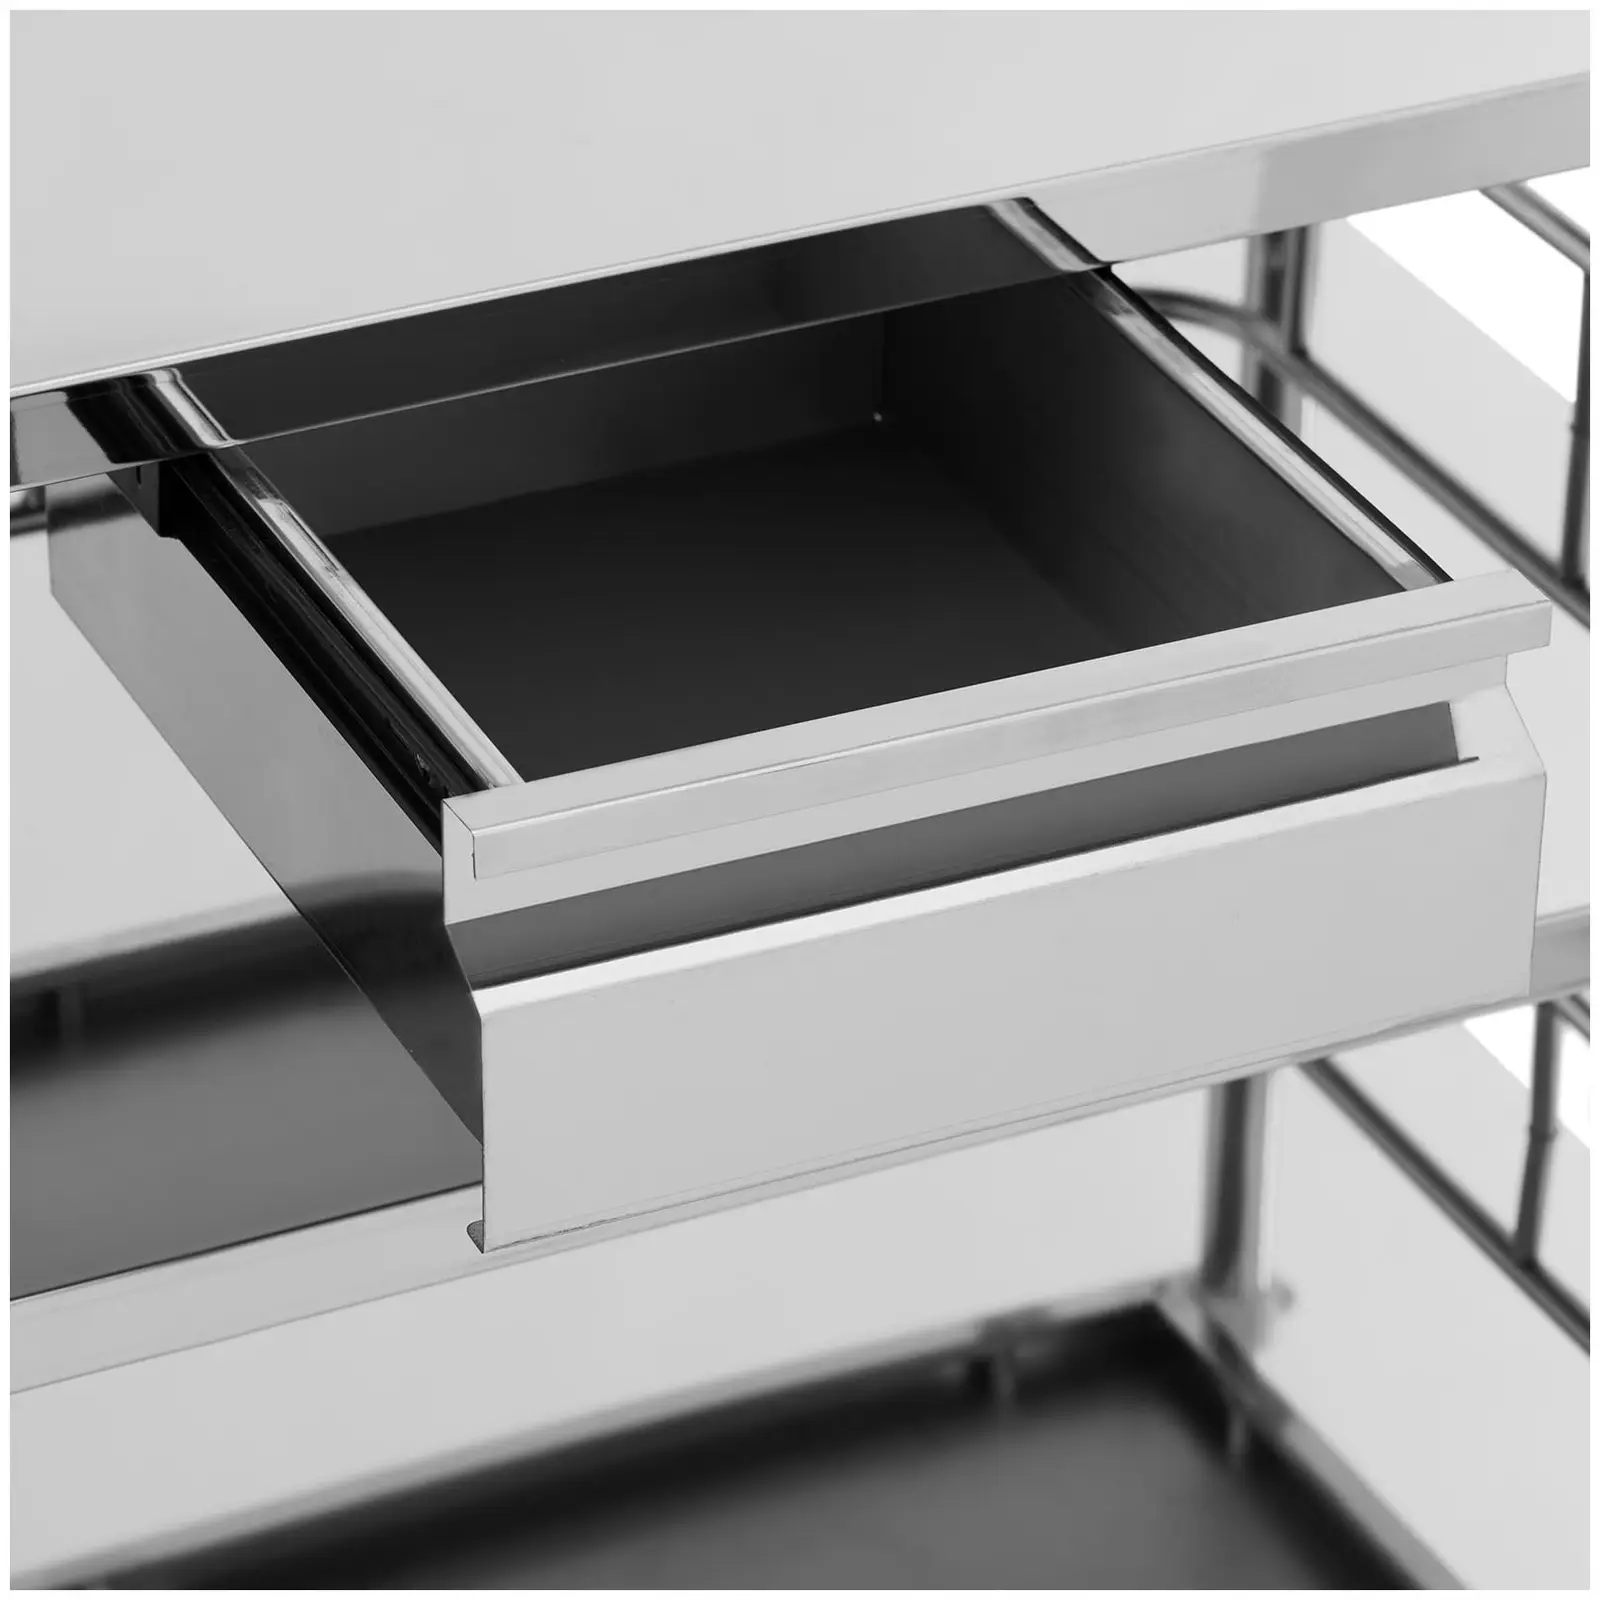 Laboratory Trolley - stainless steel - 3 shelves each 74 x 44 x 13 cm - 1 drawer - 60 kg